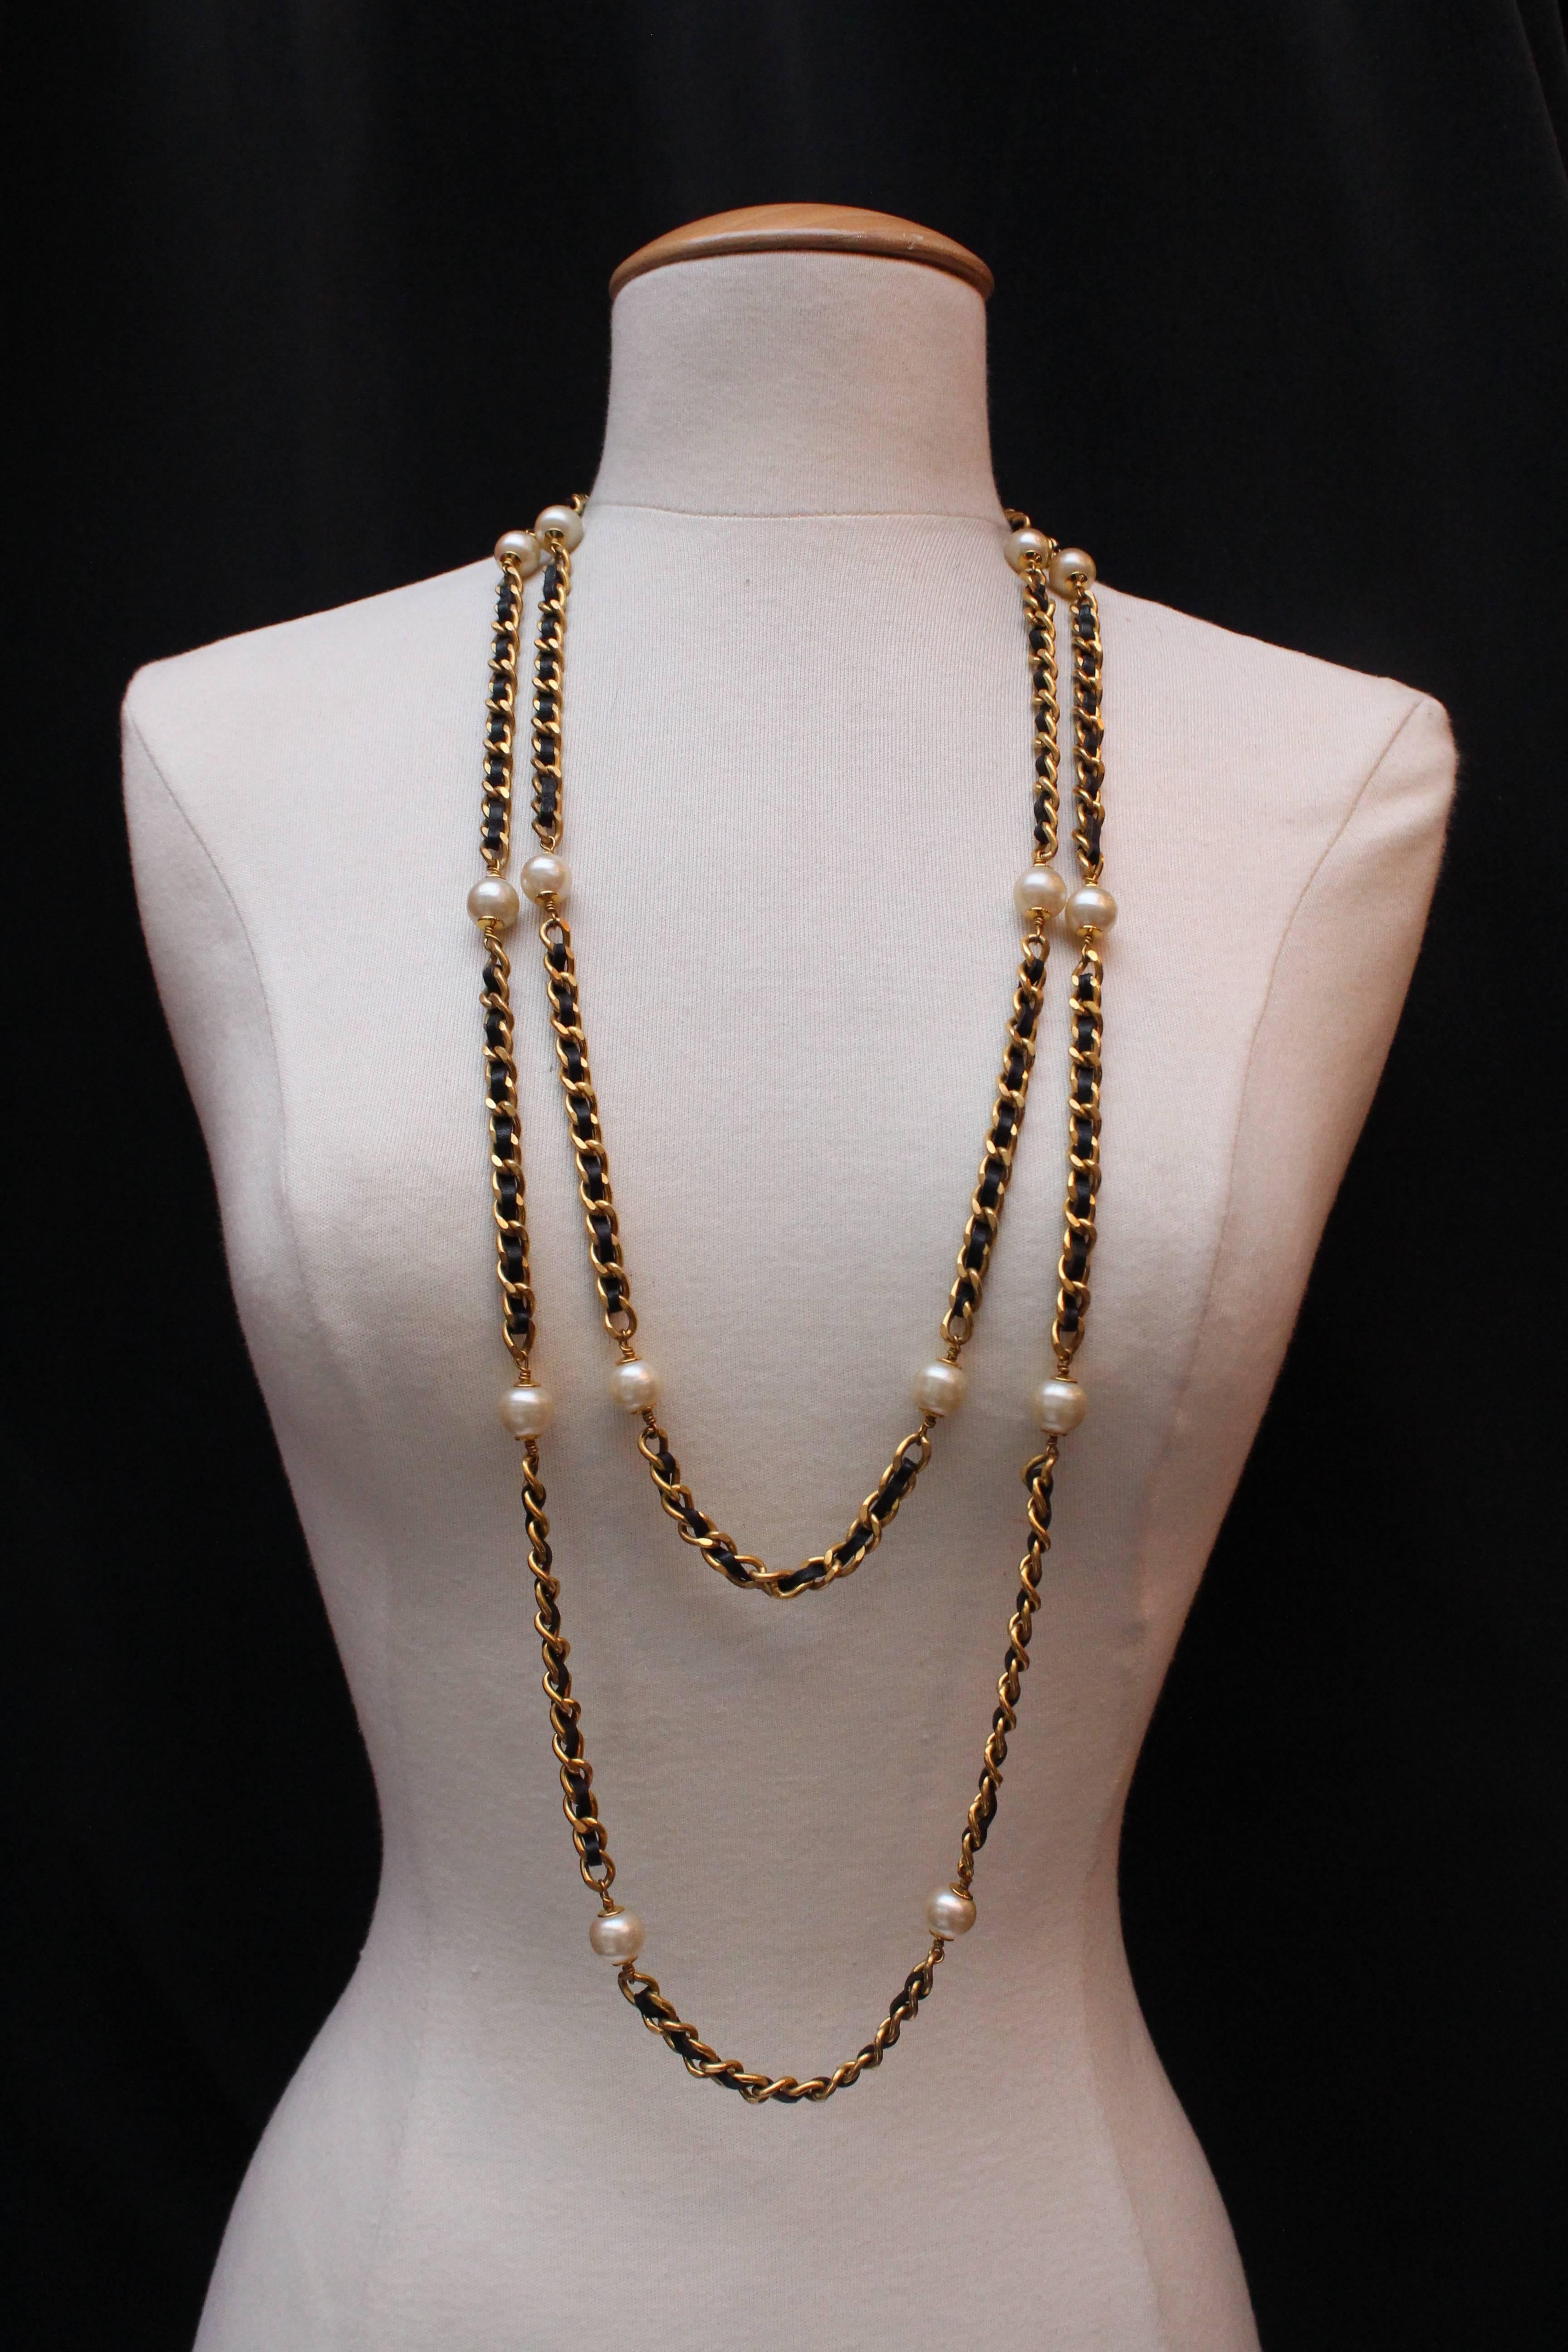 CHANEL (Made in France) Long sautoir necklace composed of a gilded metal chain entwined with black leather. This type of  work combining gilded metal and black leather characterized the iconic fashion house in the 1990’s. The necklace is embellished